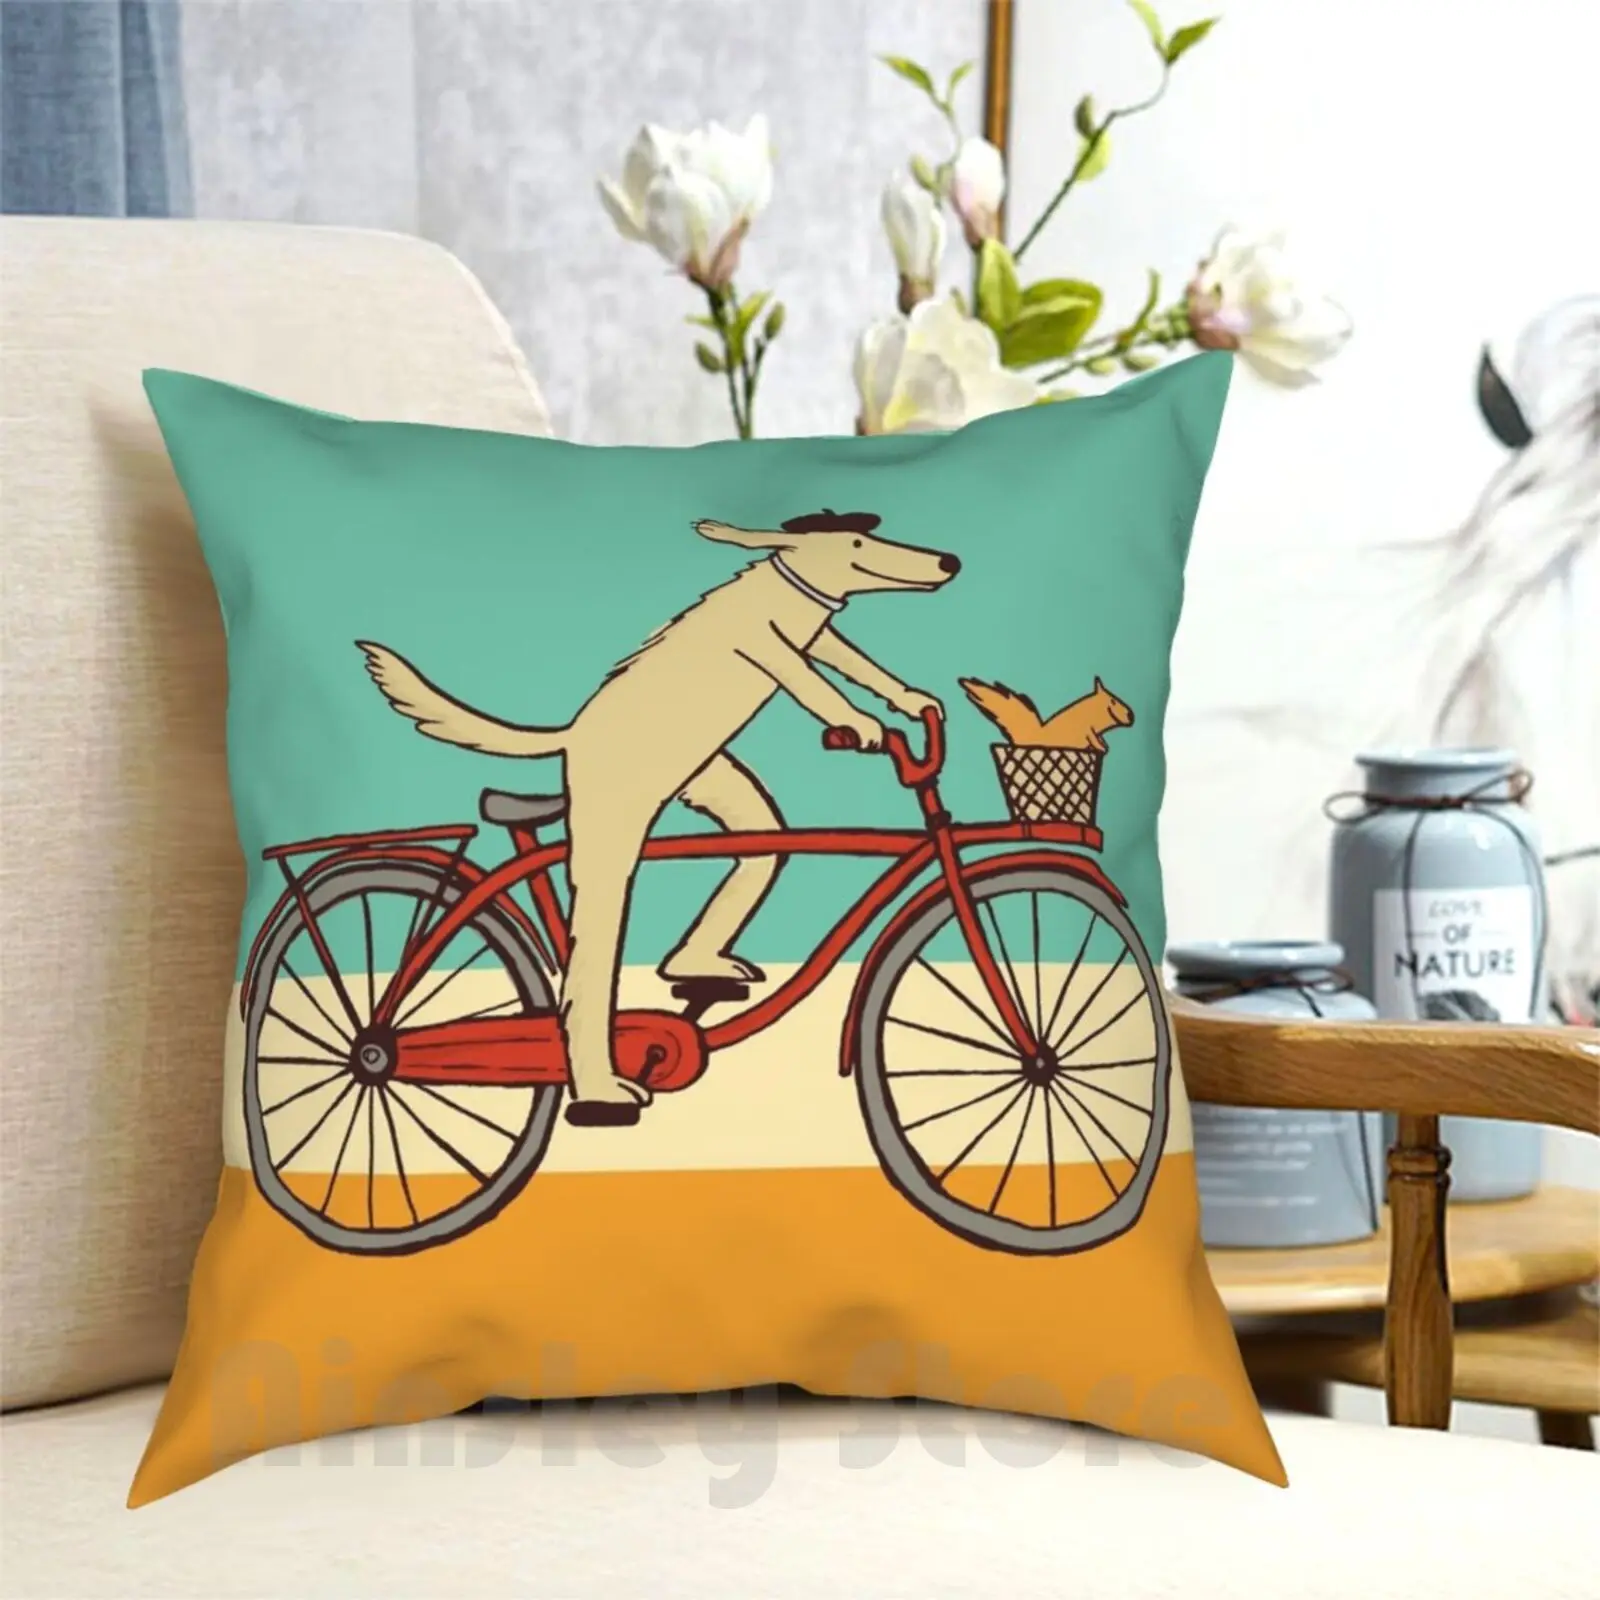 

Dog And Squirrel Are Friends | Whimsical Animal Art | Dog Riding A Bicycle Pillow Case Printed Home Soft Throw Pillow